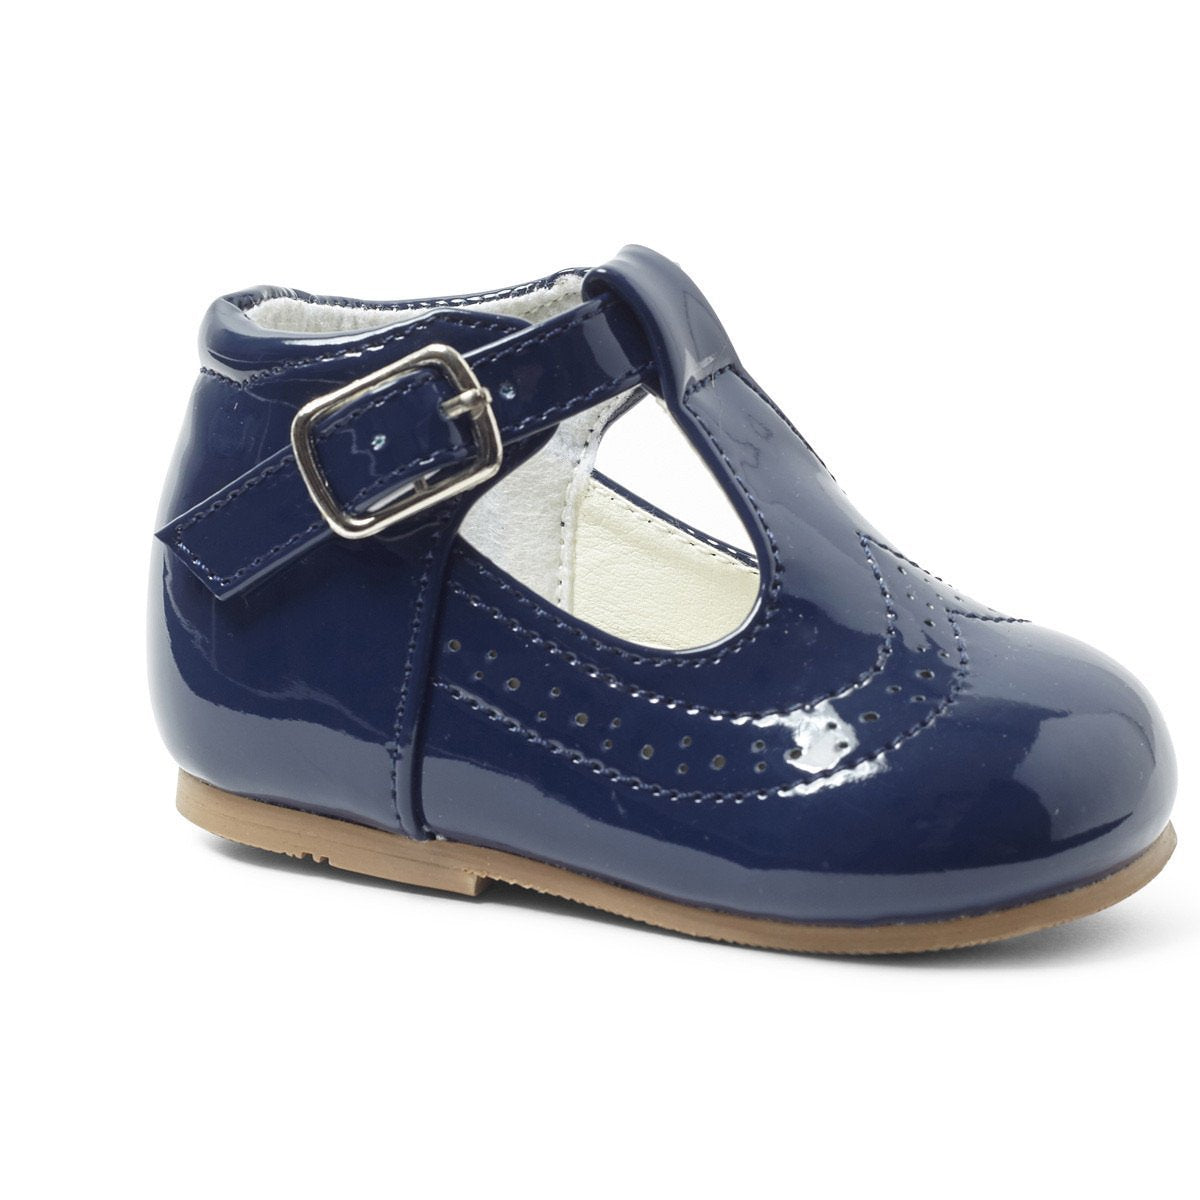 Billy Navy t-bar hard sole shoes - Hetty's Baby Boutique